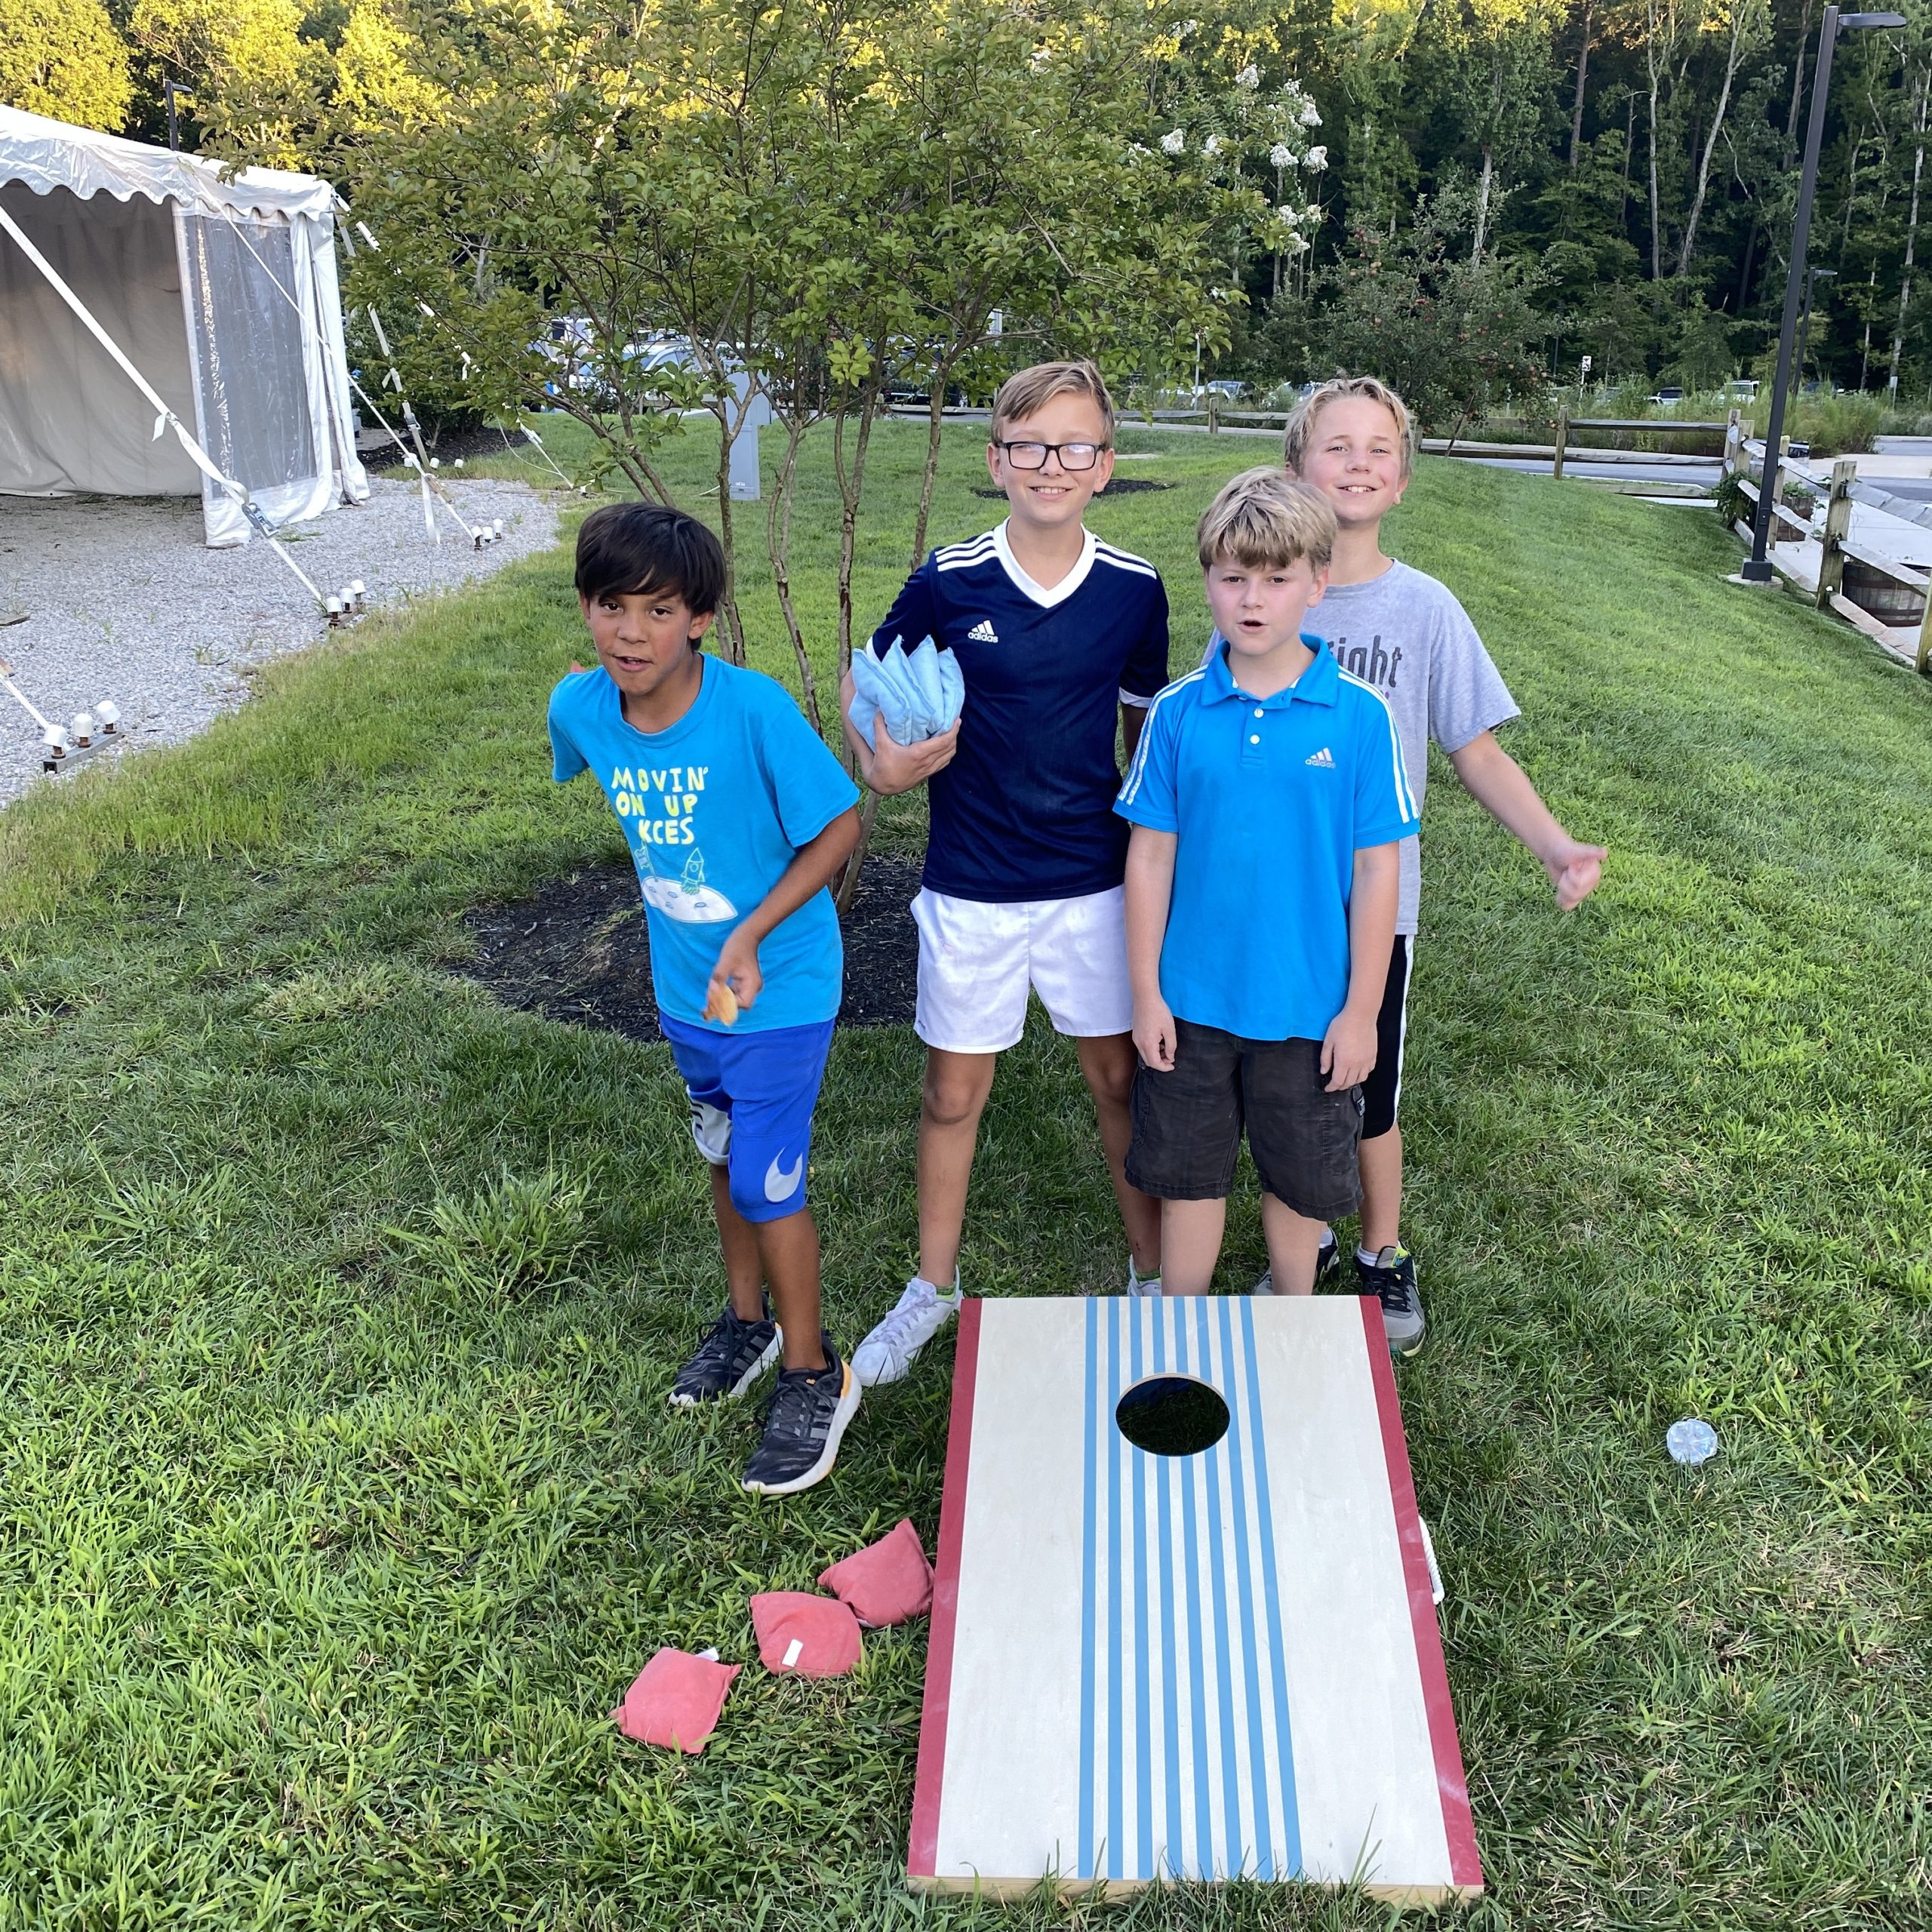 Four boys are playing the game corn hole